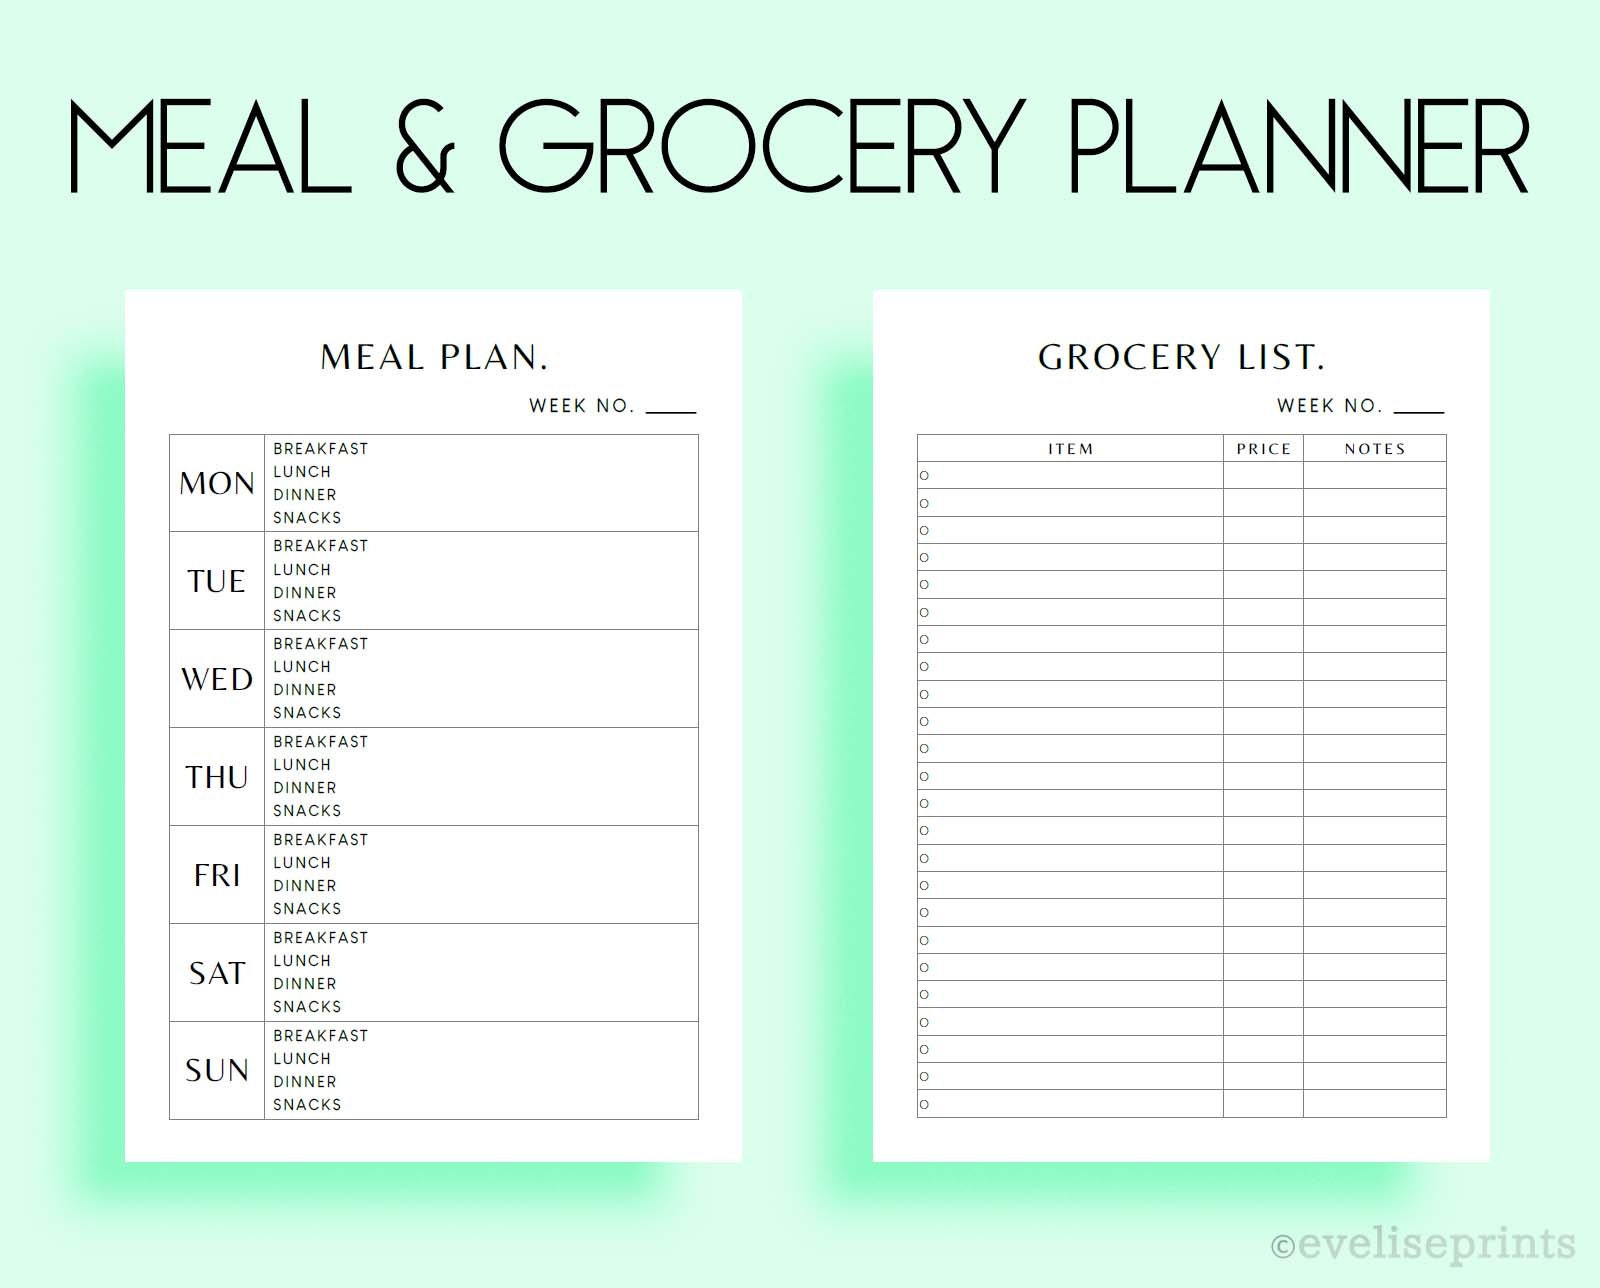 Meal & Grocery Planner Clean, Minimalist Design A4, A5, A6 Printable - Etsy